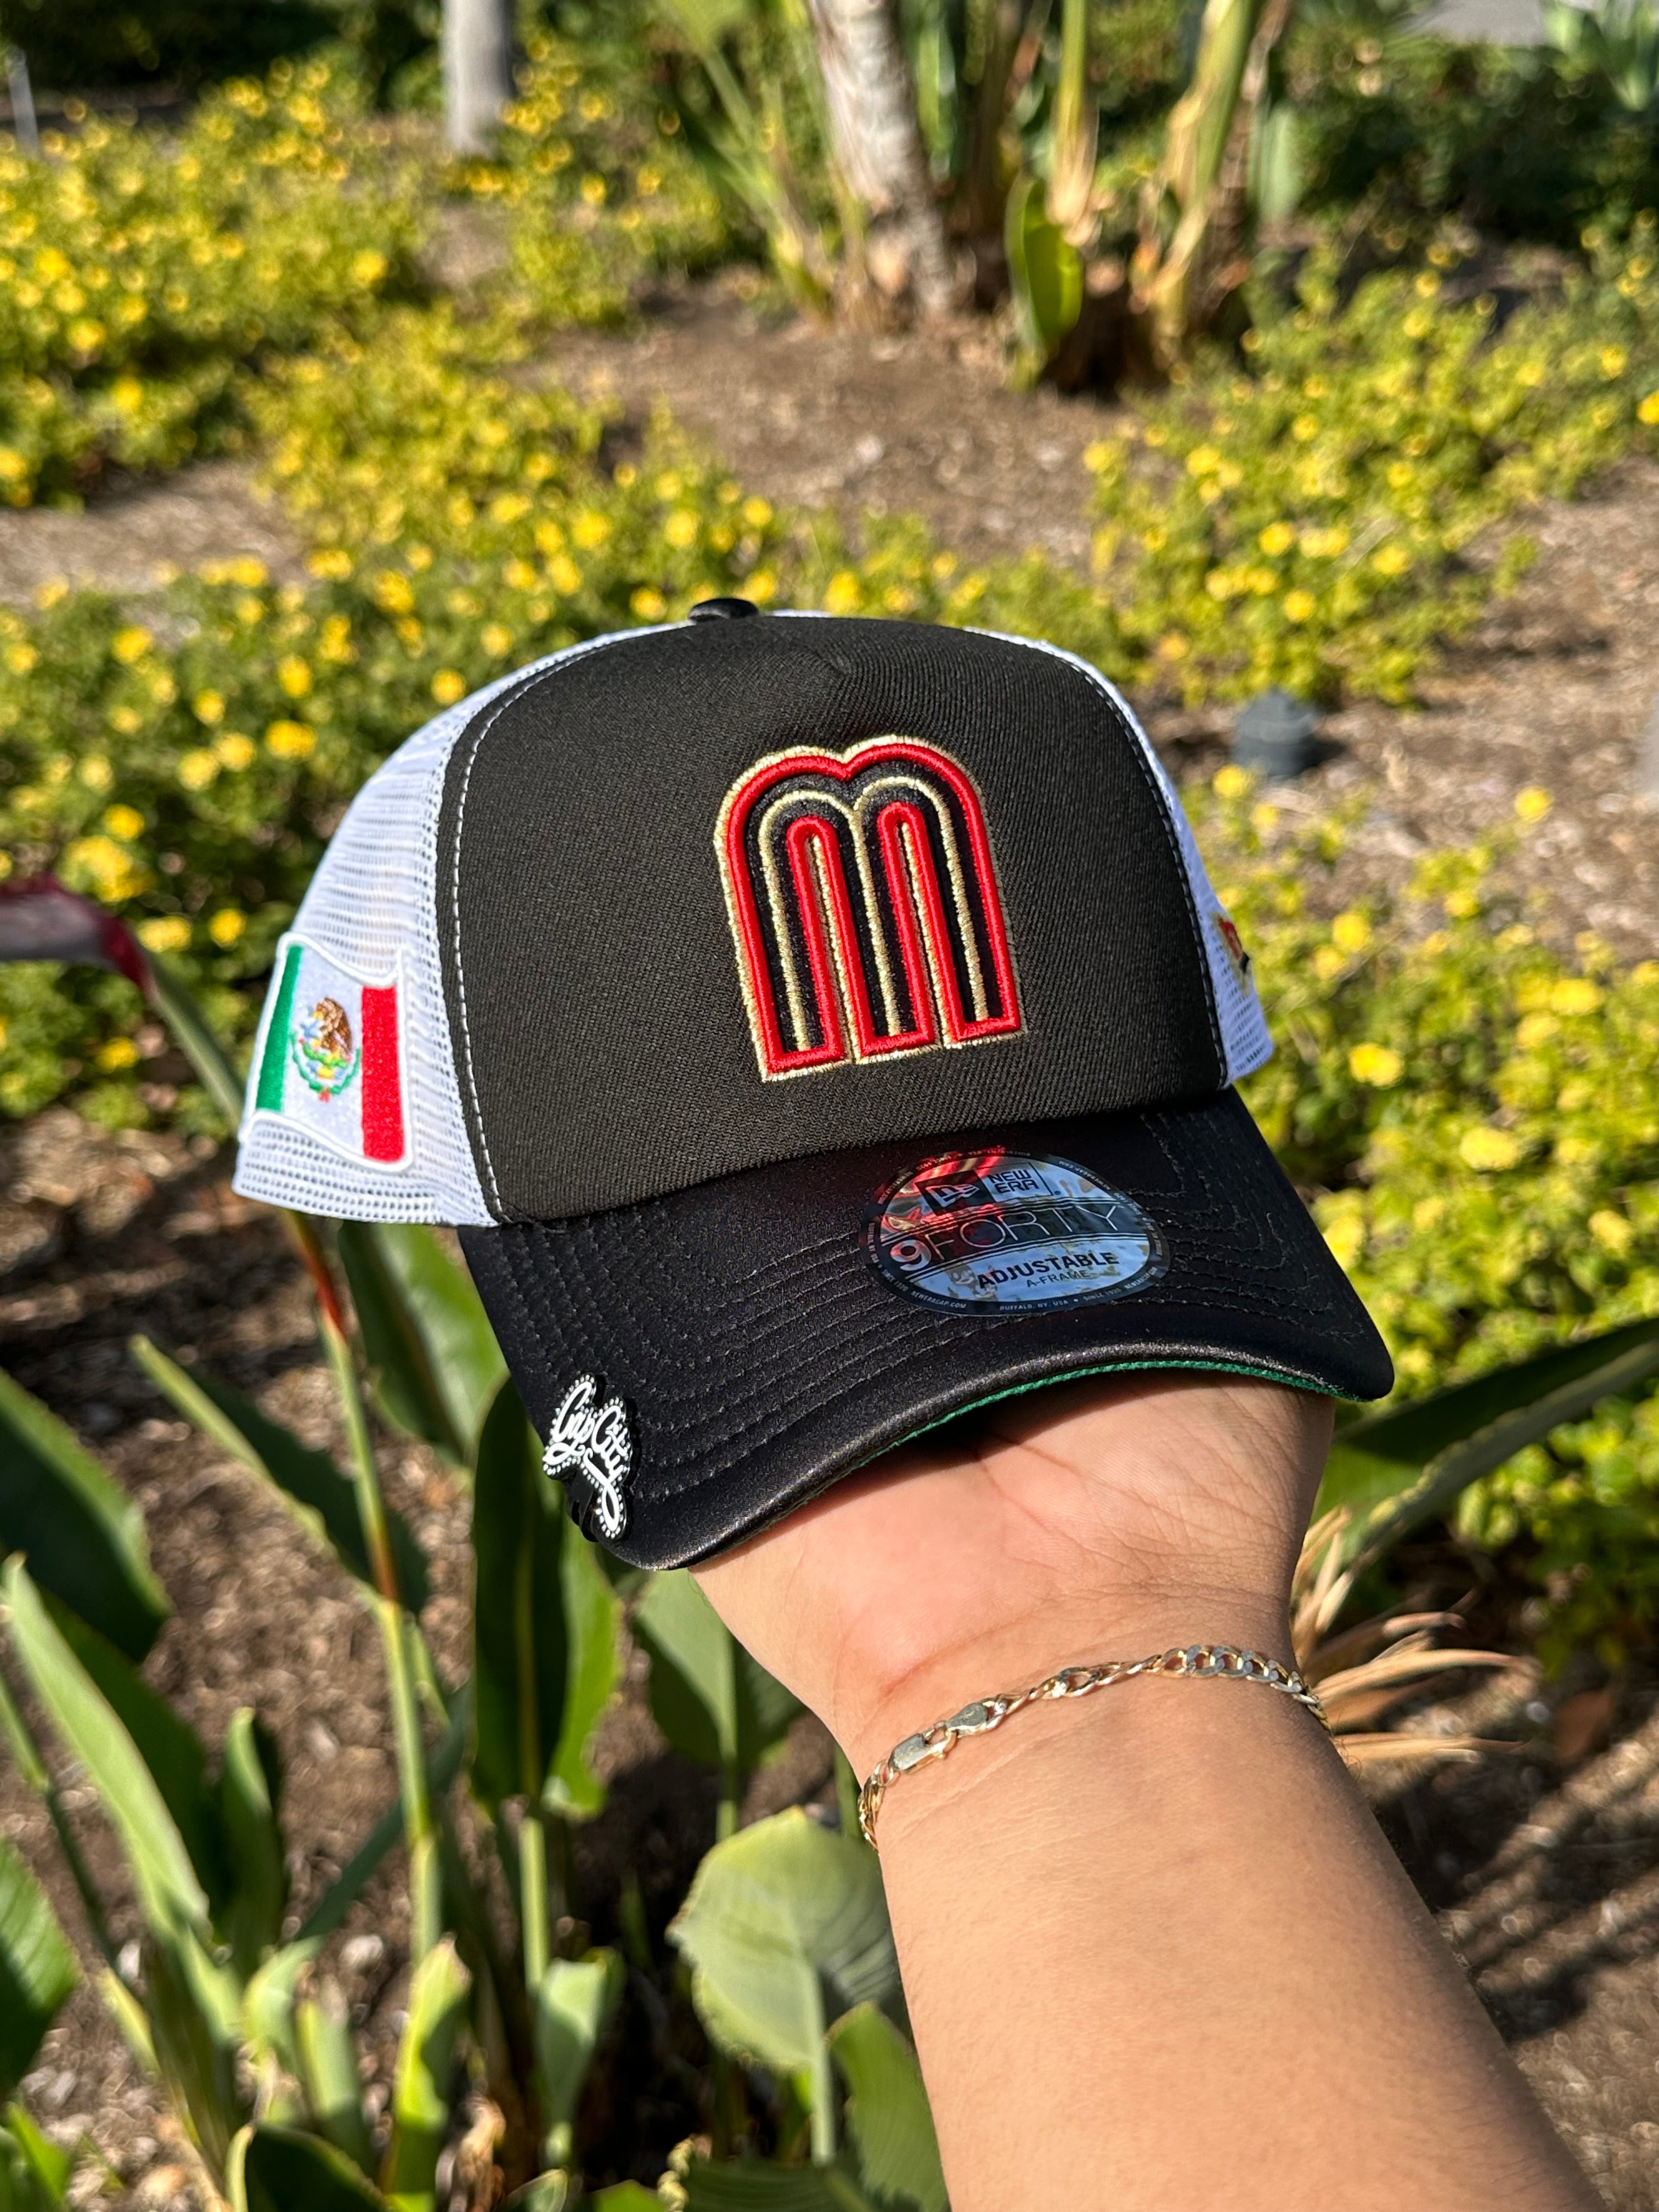 NEW ERA EXCLUSIVE 9FORTY BLACK/SATIN MEXICO A-FRAME MESHBACK ADJUSTABLE W/ MEXICO FLAG SIDE PATCH